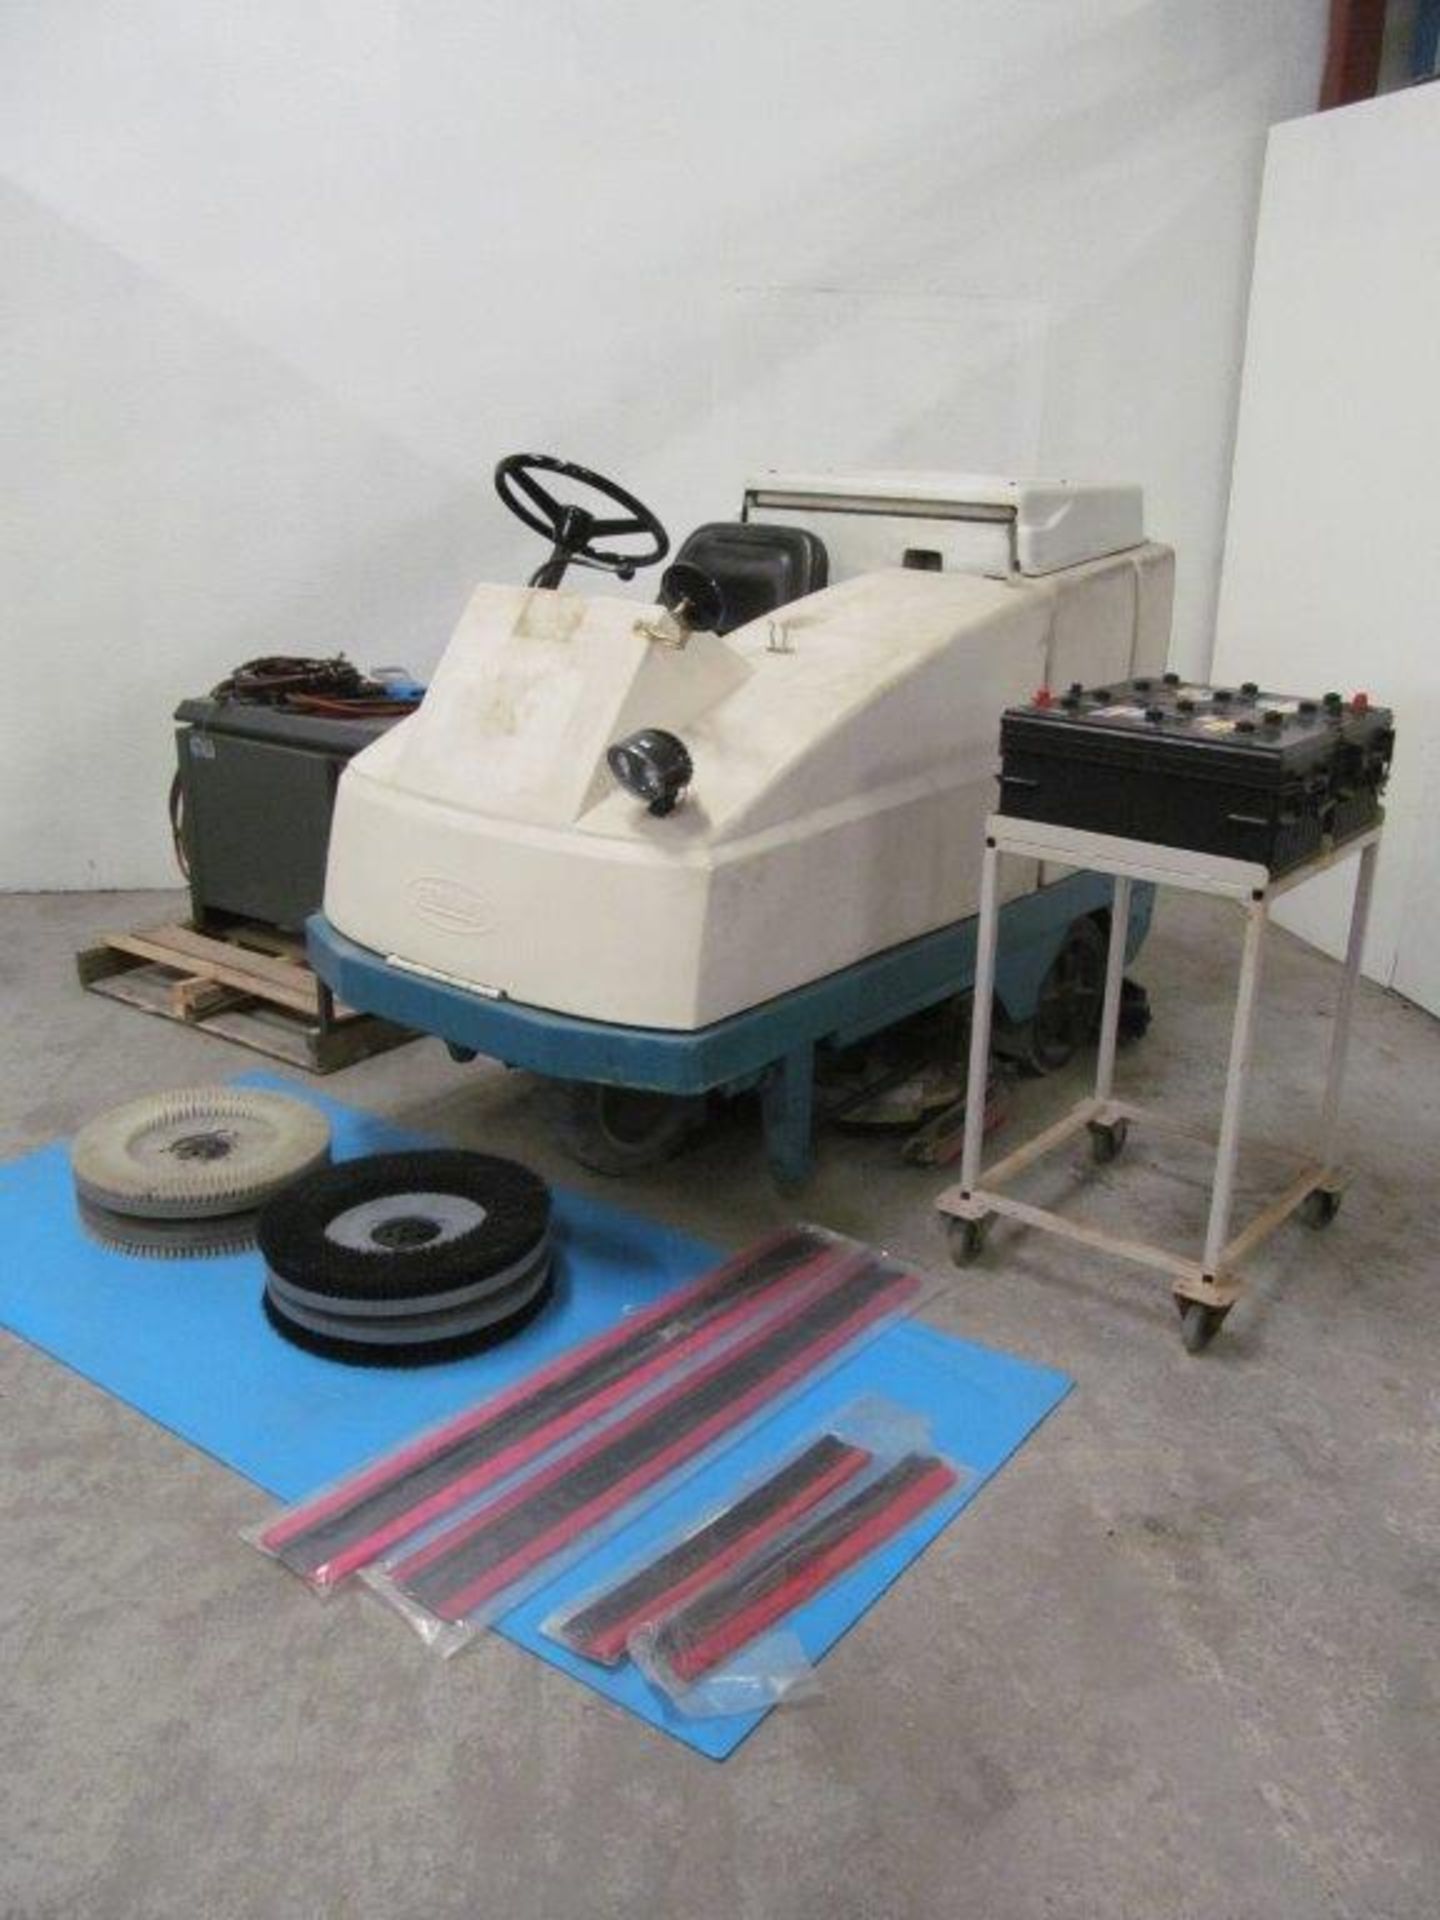 TENNANT ELECTRIC FLOOR SWEEPER, C/W CHARGER 36V, SPARE BATTERIES & BRUSHES (CONDITION UNKNOWN) - Image 3 of 8